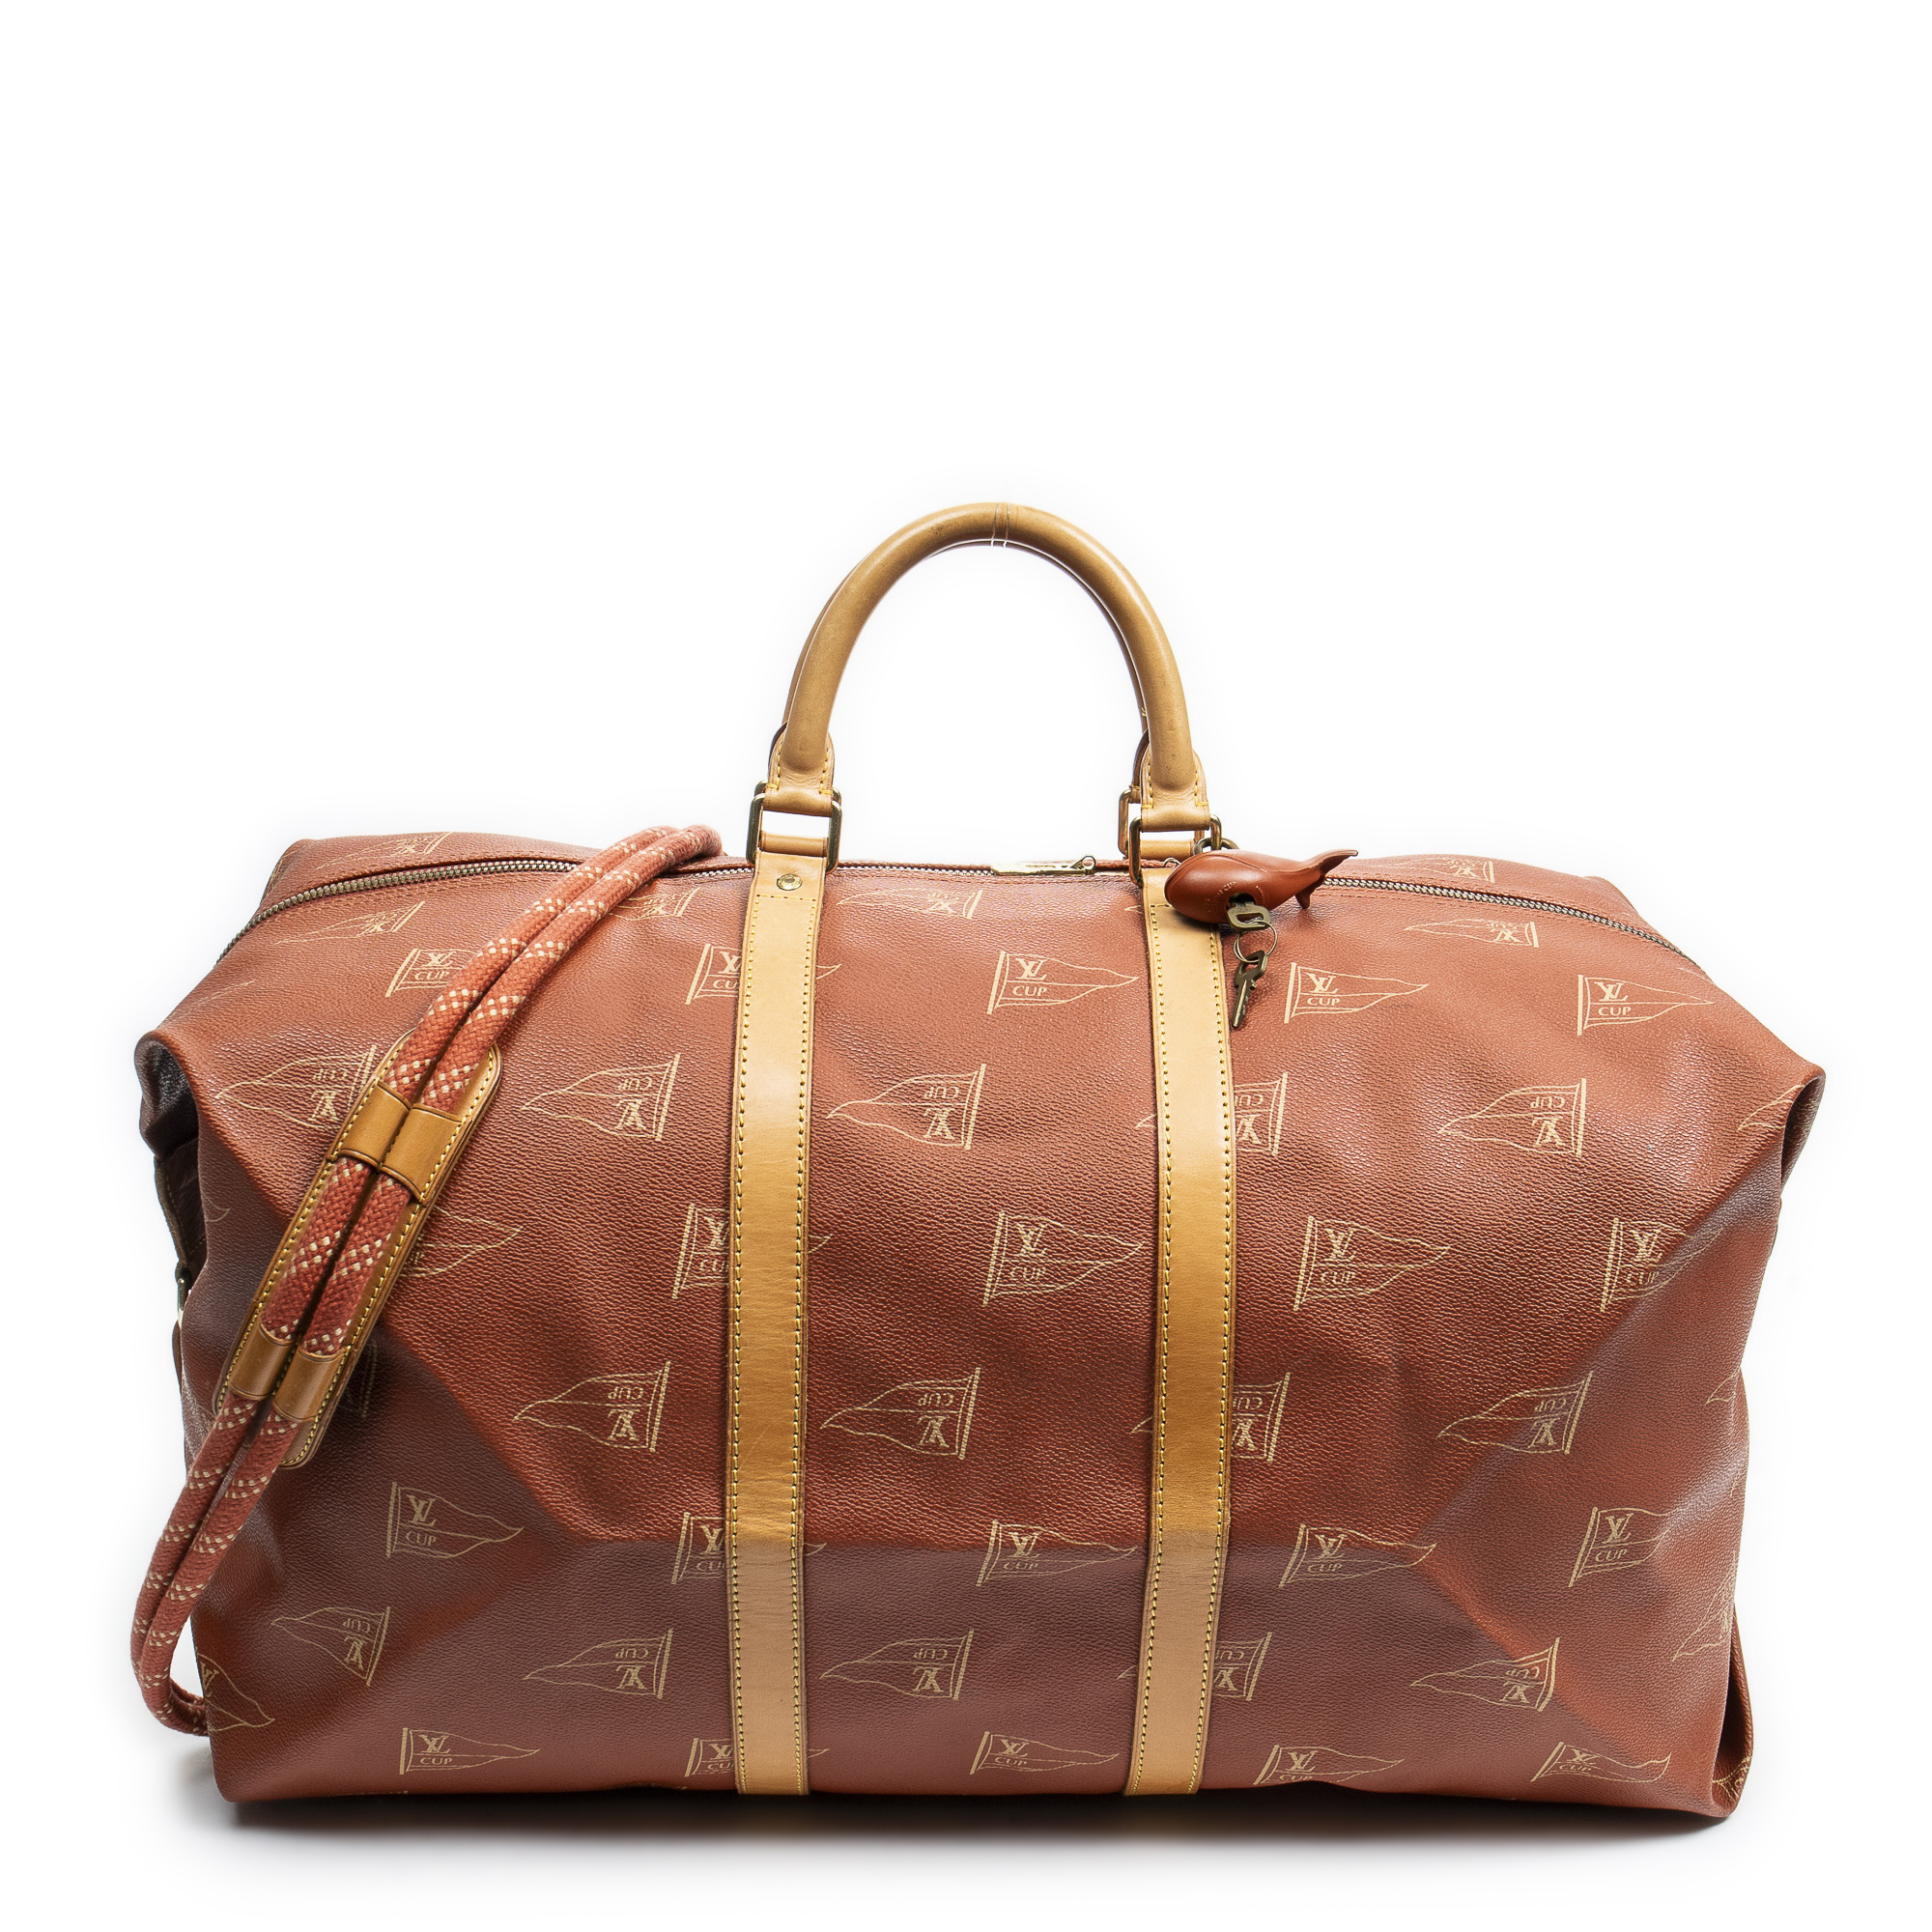 Louis Vuitton America's Cup Travel Bag in Red Monogram Canvas and